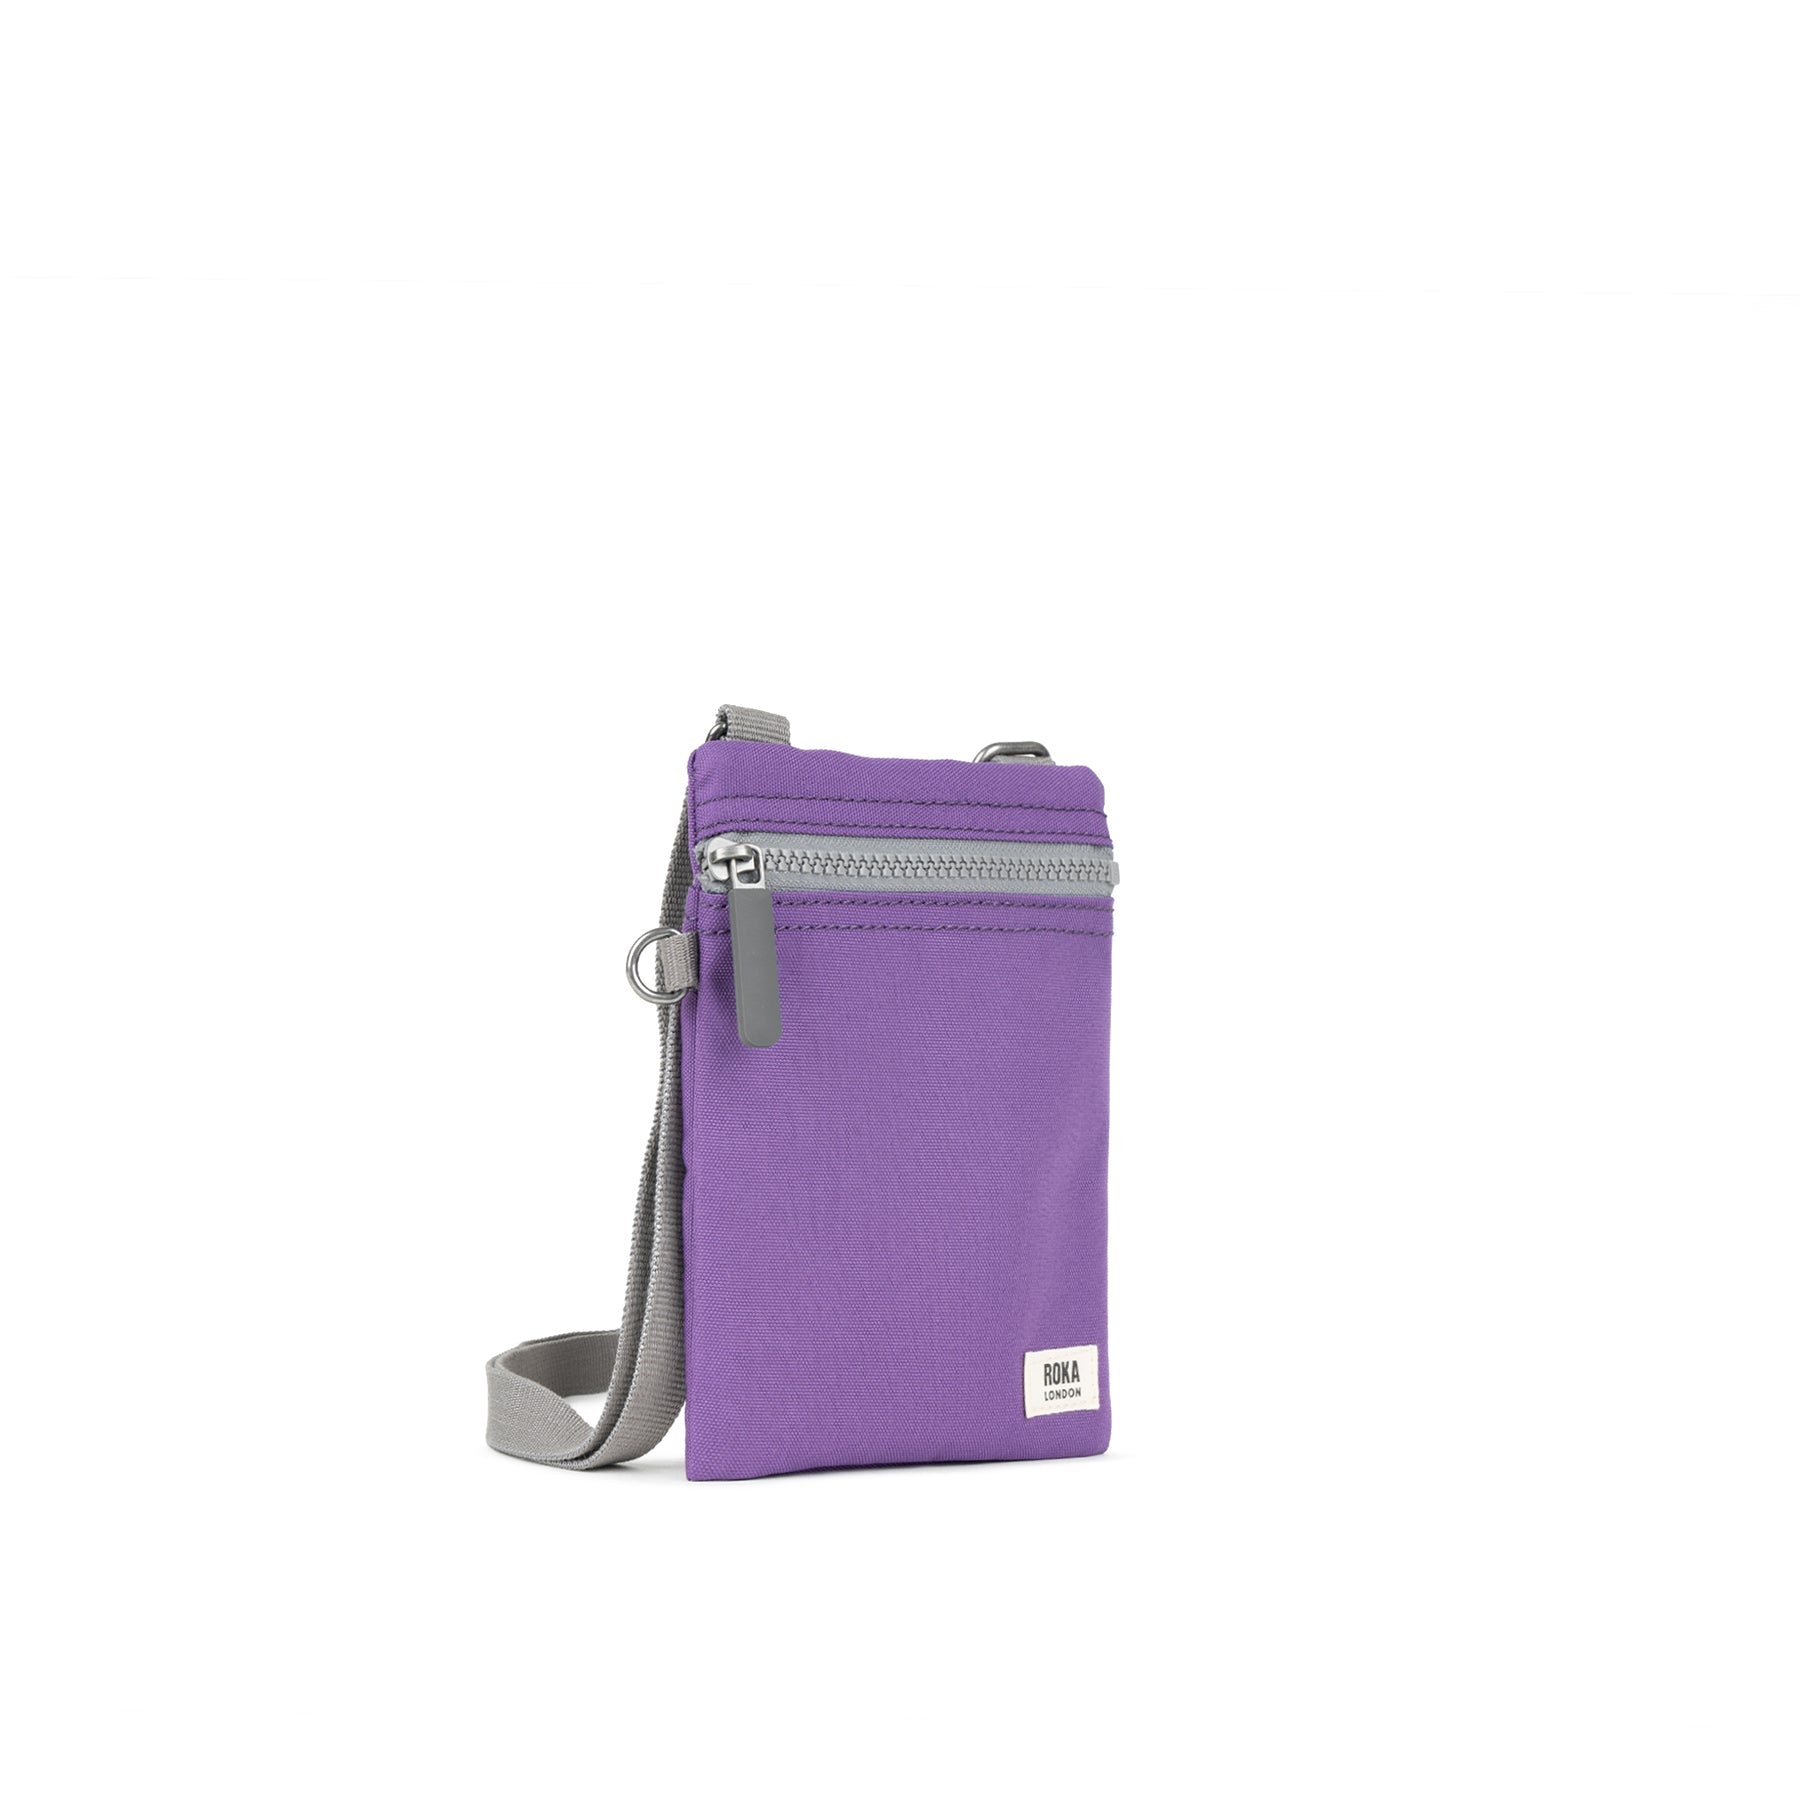 ROKA Chelsea Imperial Purple Recycled Canvas Bag - OS